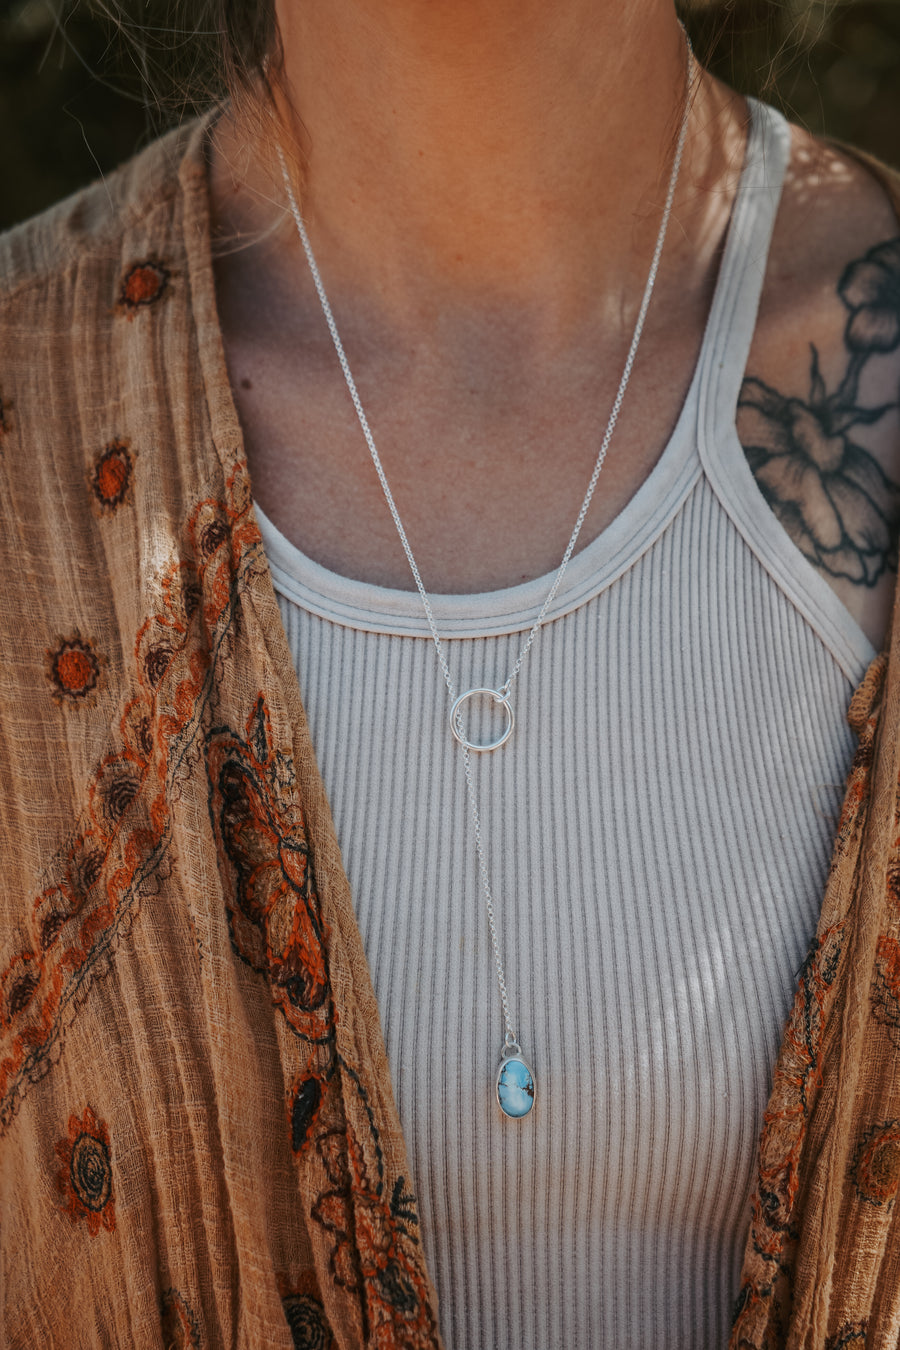 The Lariat in Golden Hills Turquoise